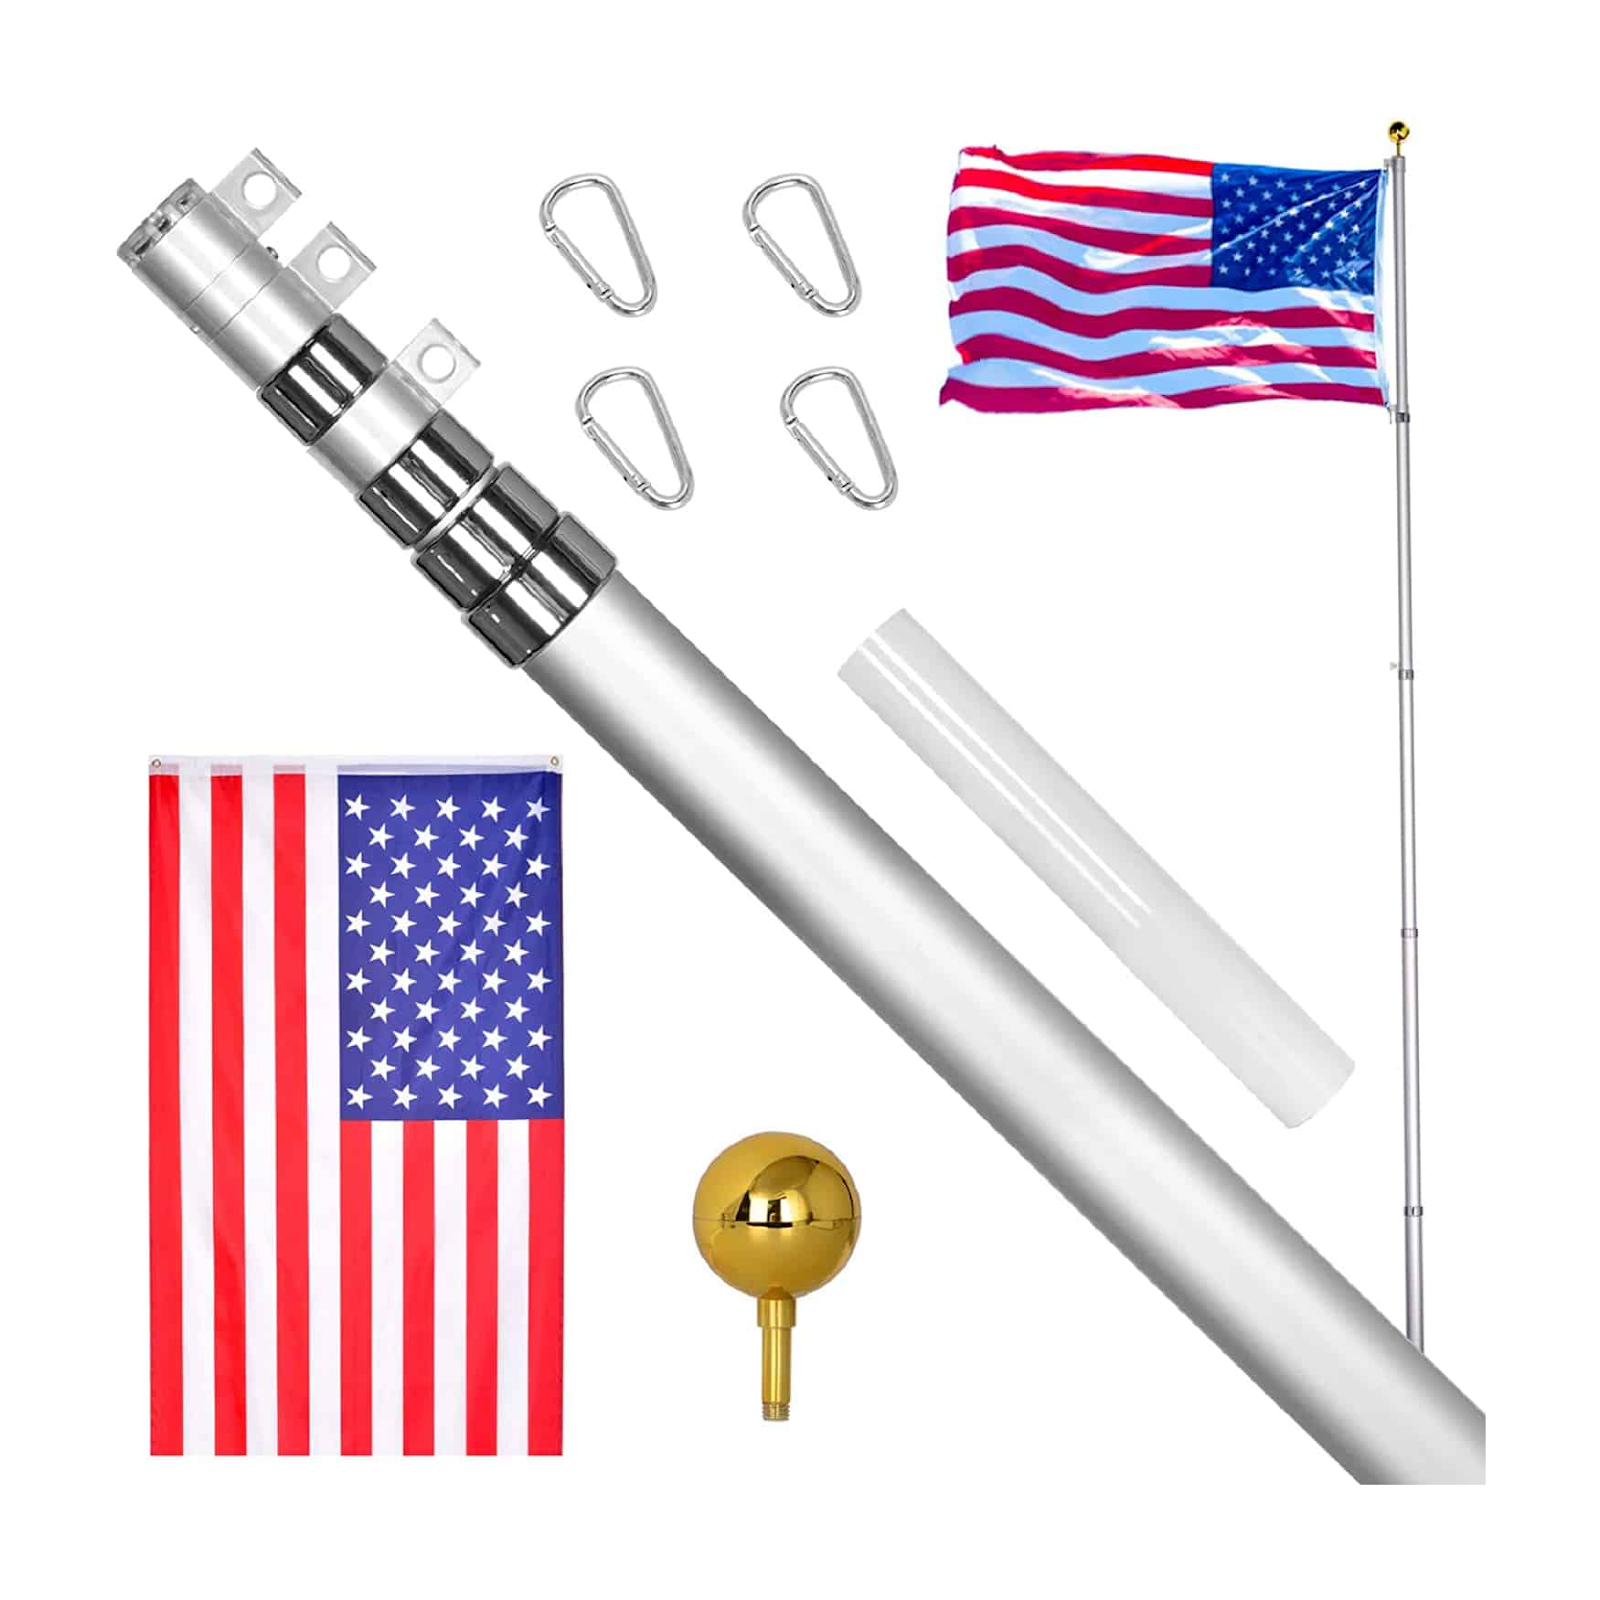 The Ultimate Guide to Low-Maintenance Telescoping Flagpoles